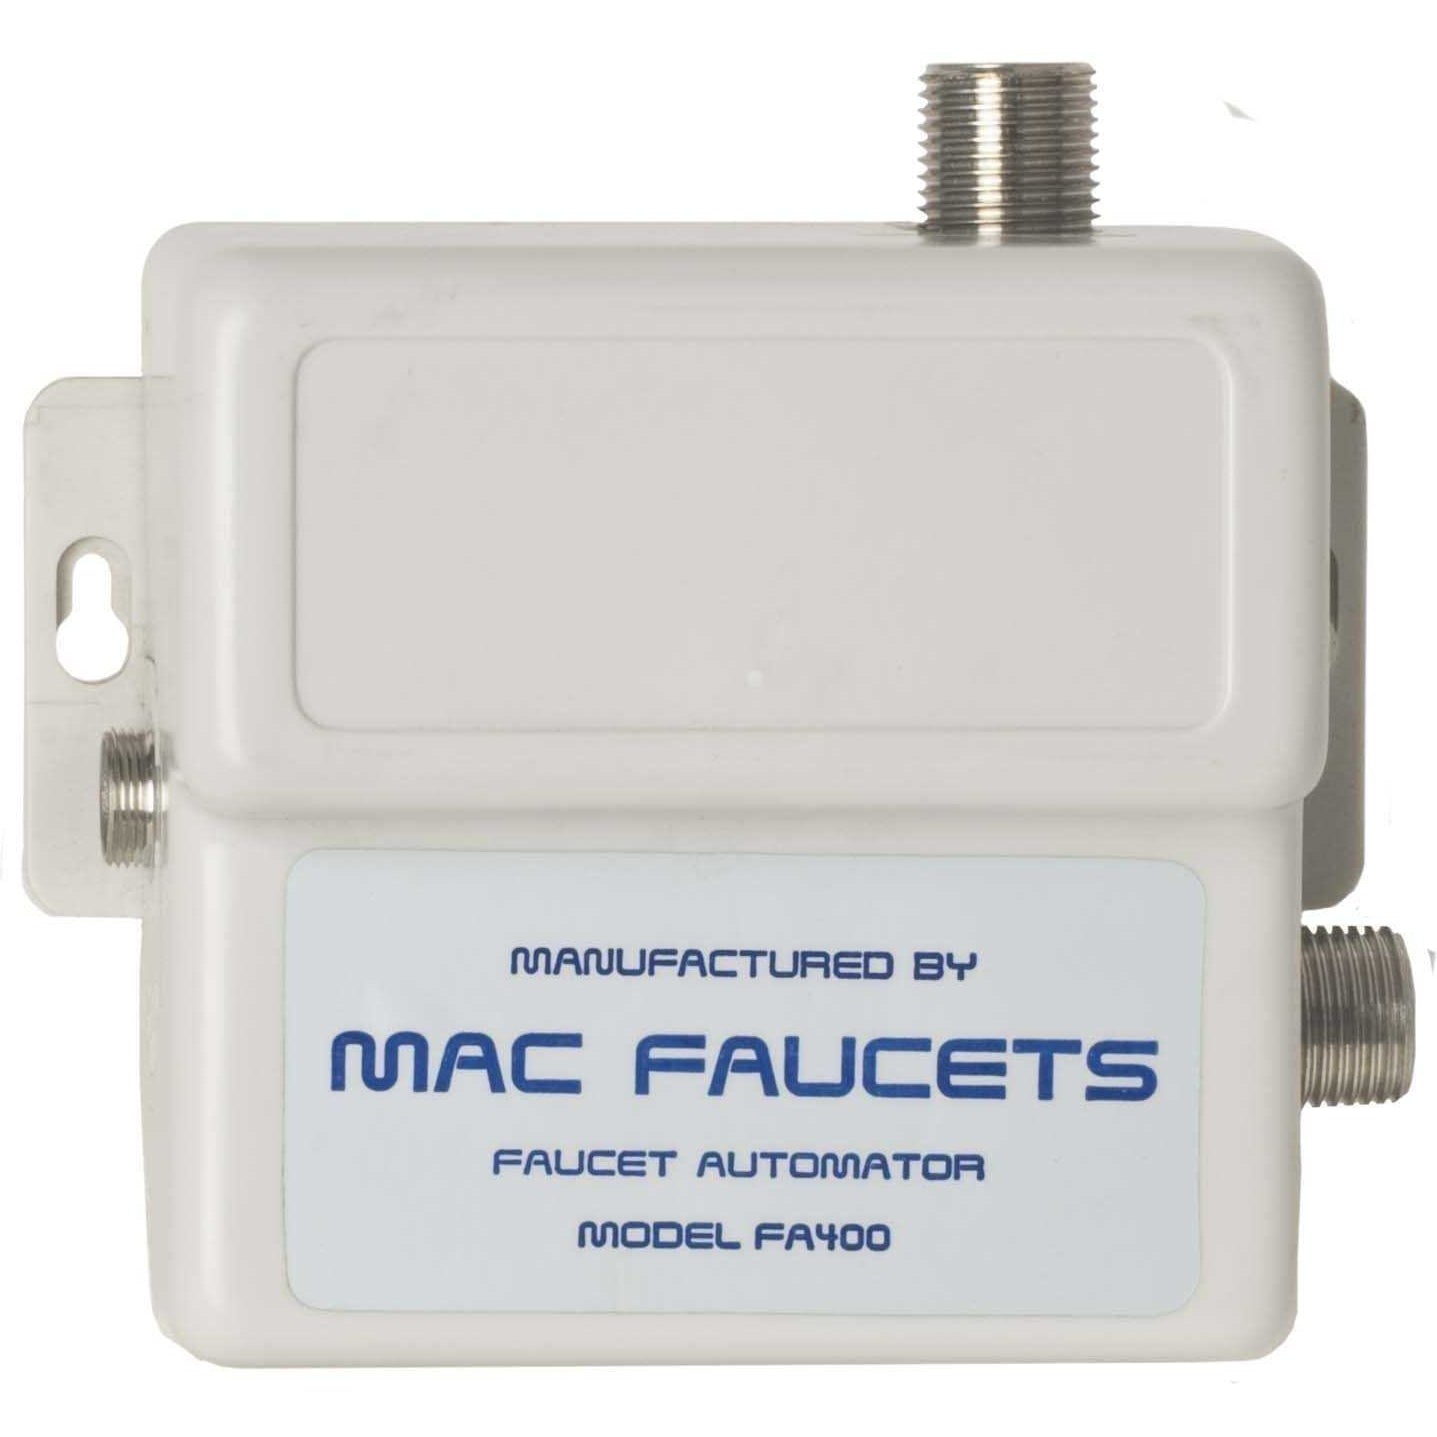 R-40400 Battery-Powered Automator for FA400 Series